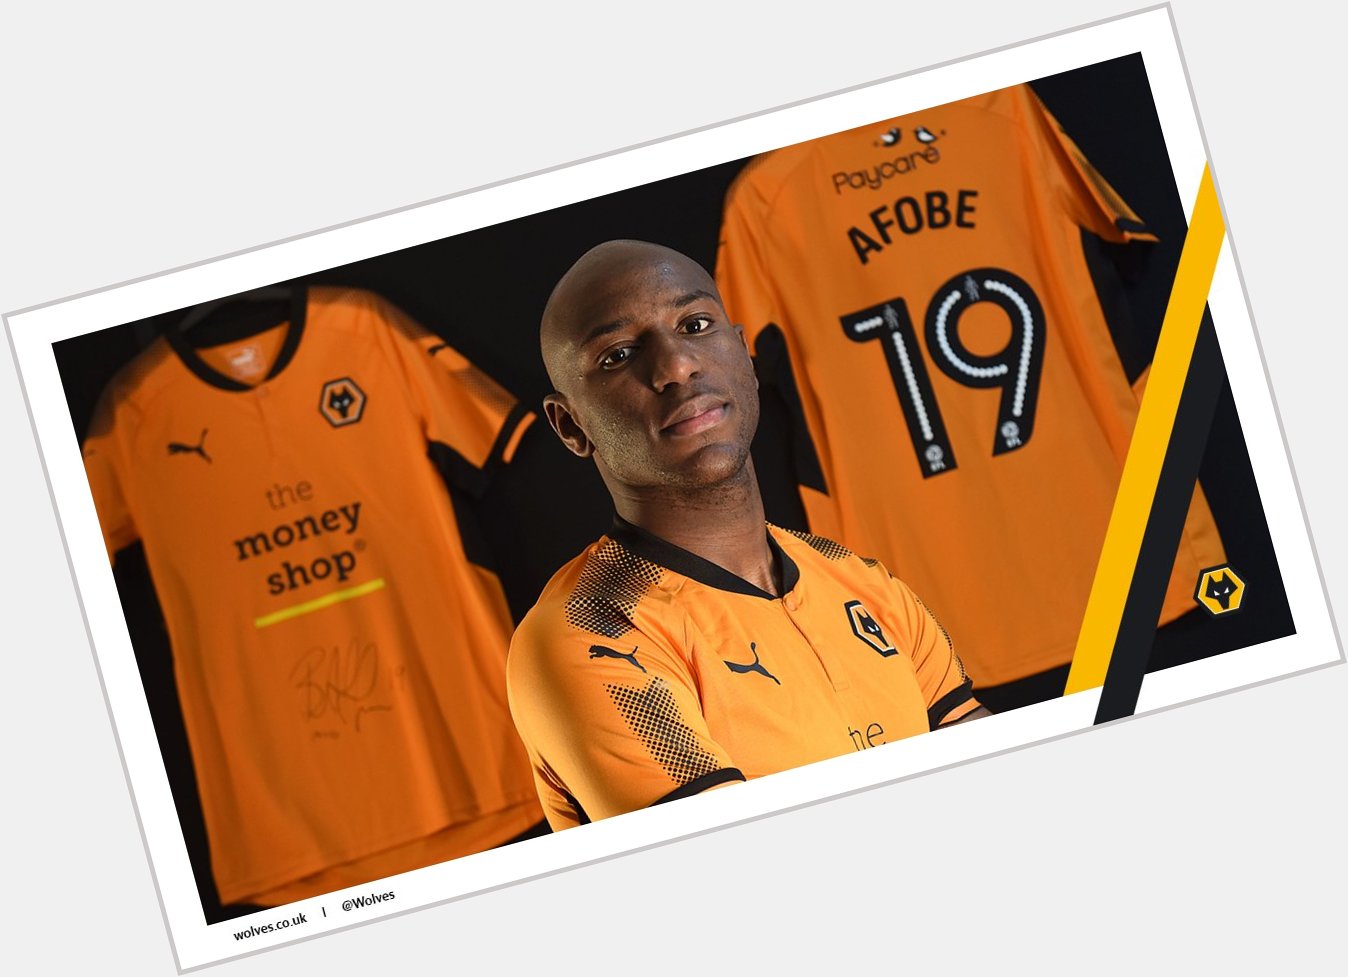 Happy Birthday to Benik Afobe, he turns 25 today! Have a great day Benik! 